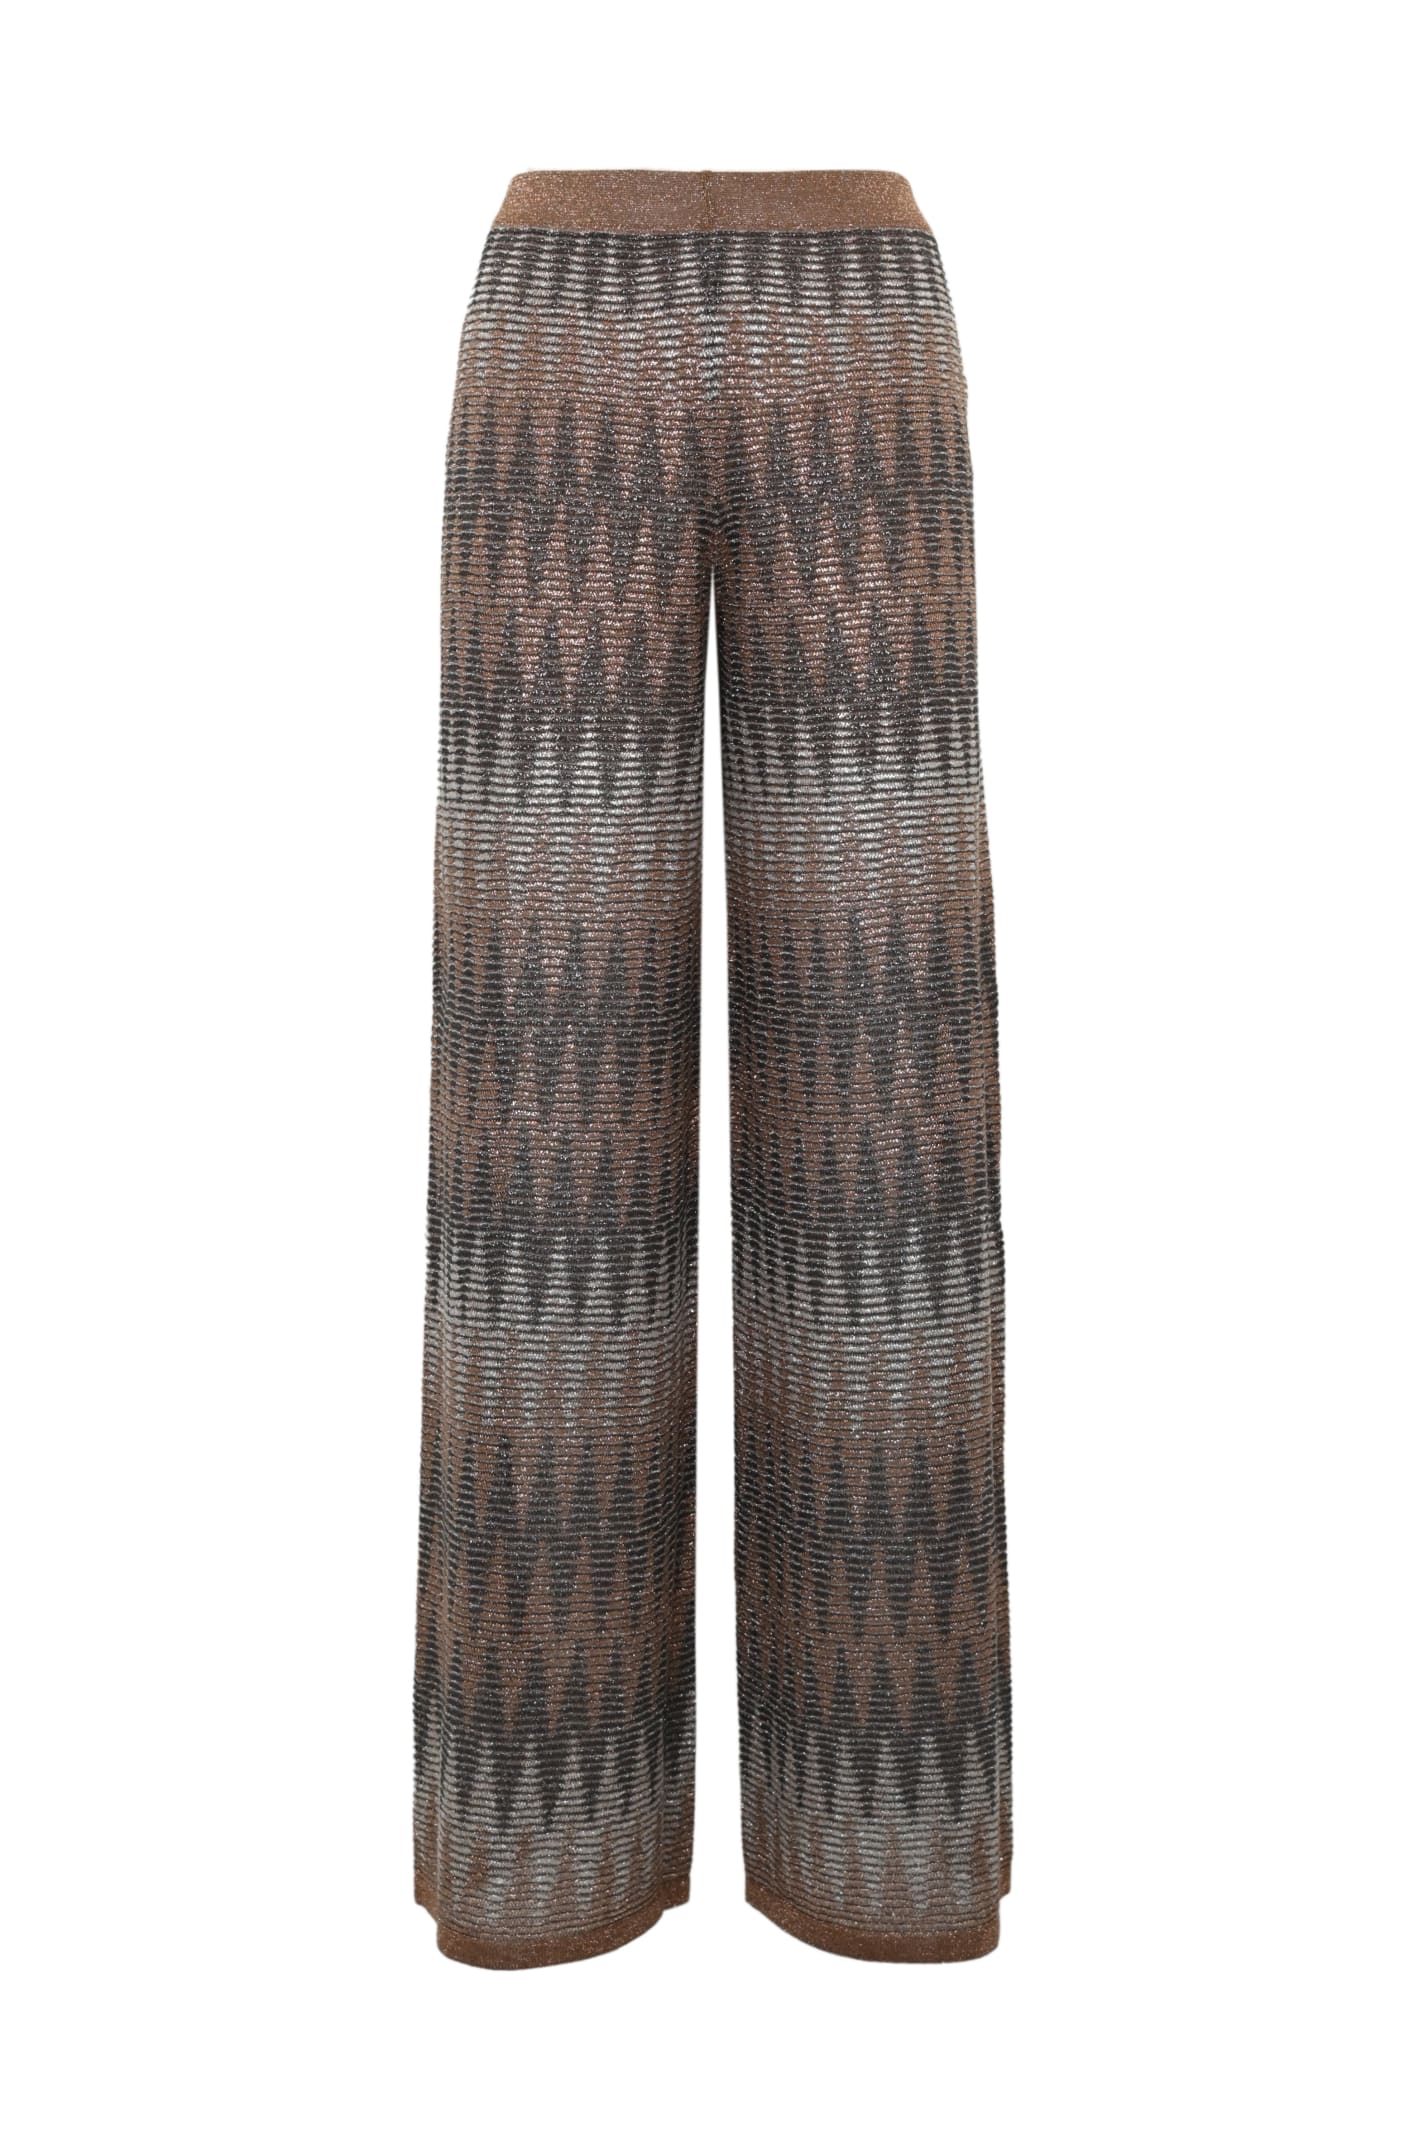 Patterned Viscose Trousers